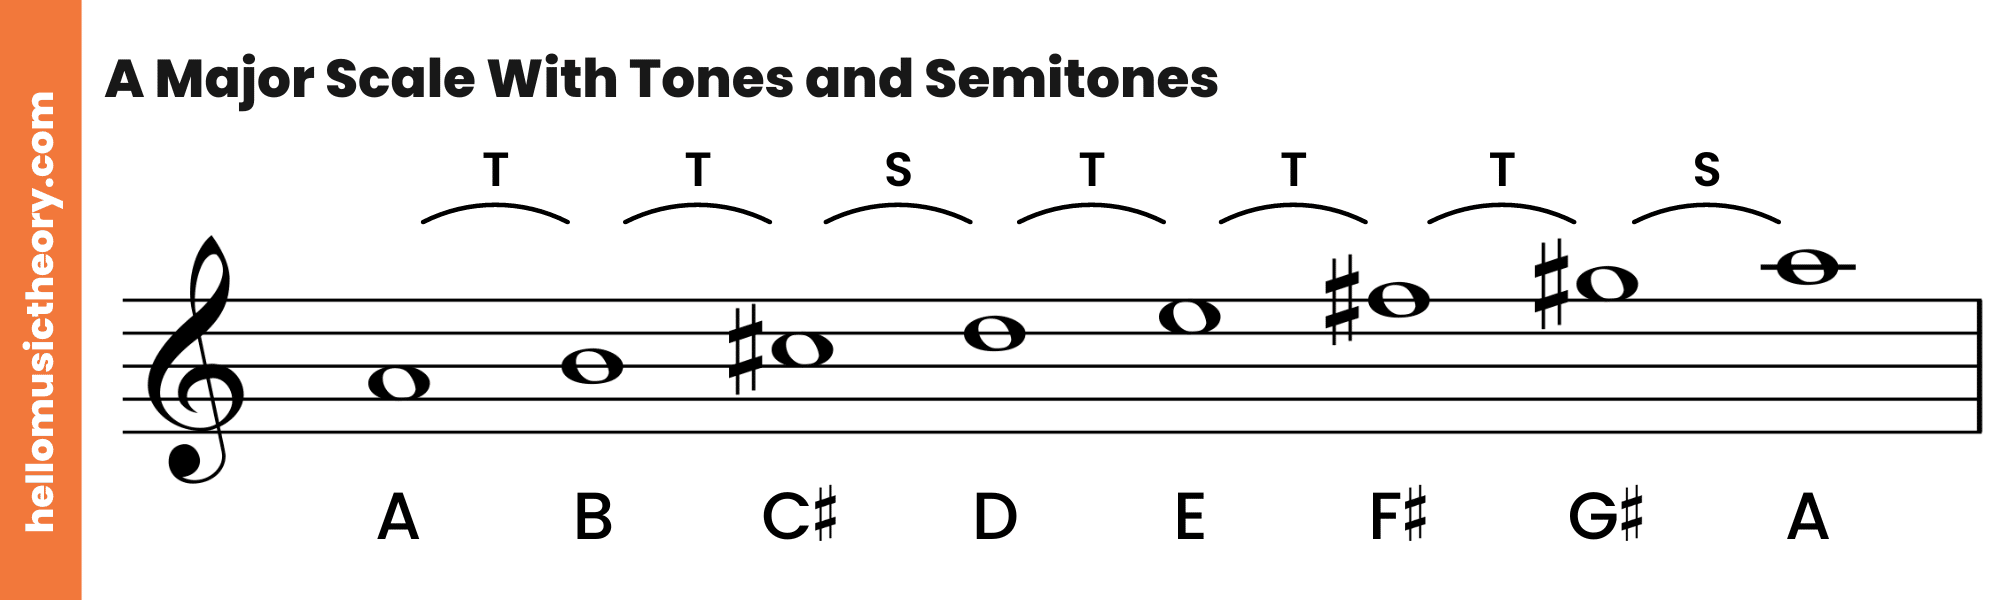 A Major Scale Treble Clef With Tones and Semitones